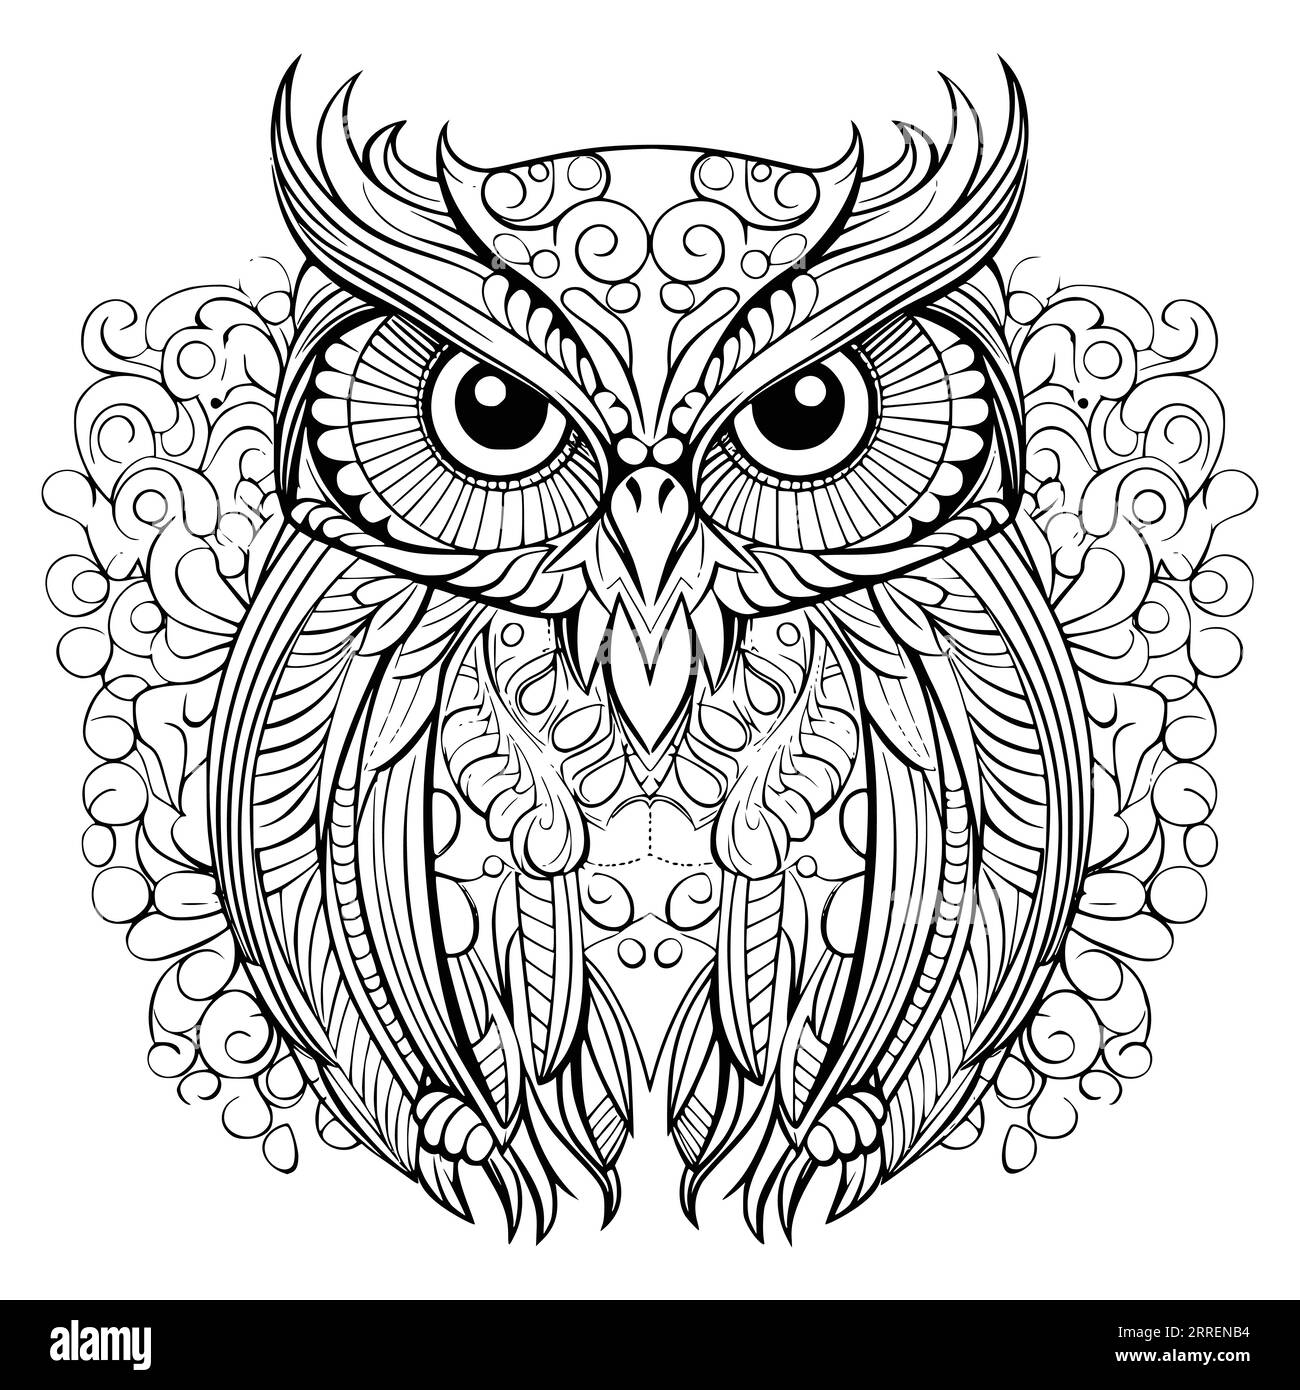 Beautiful Owl Coloring Pages Drawing For Kids Stock Vector